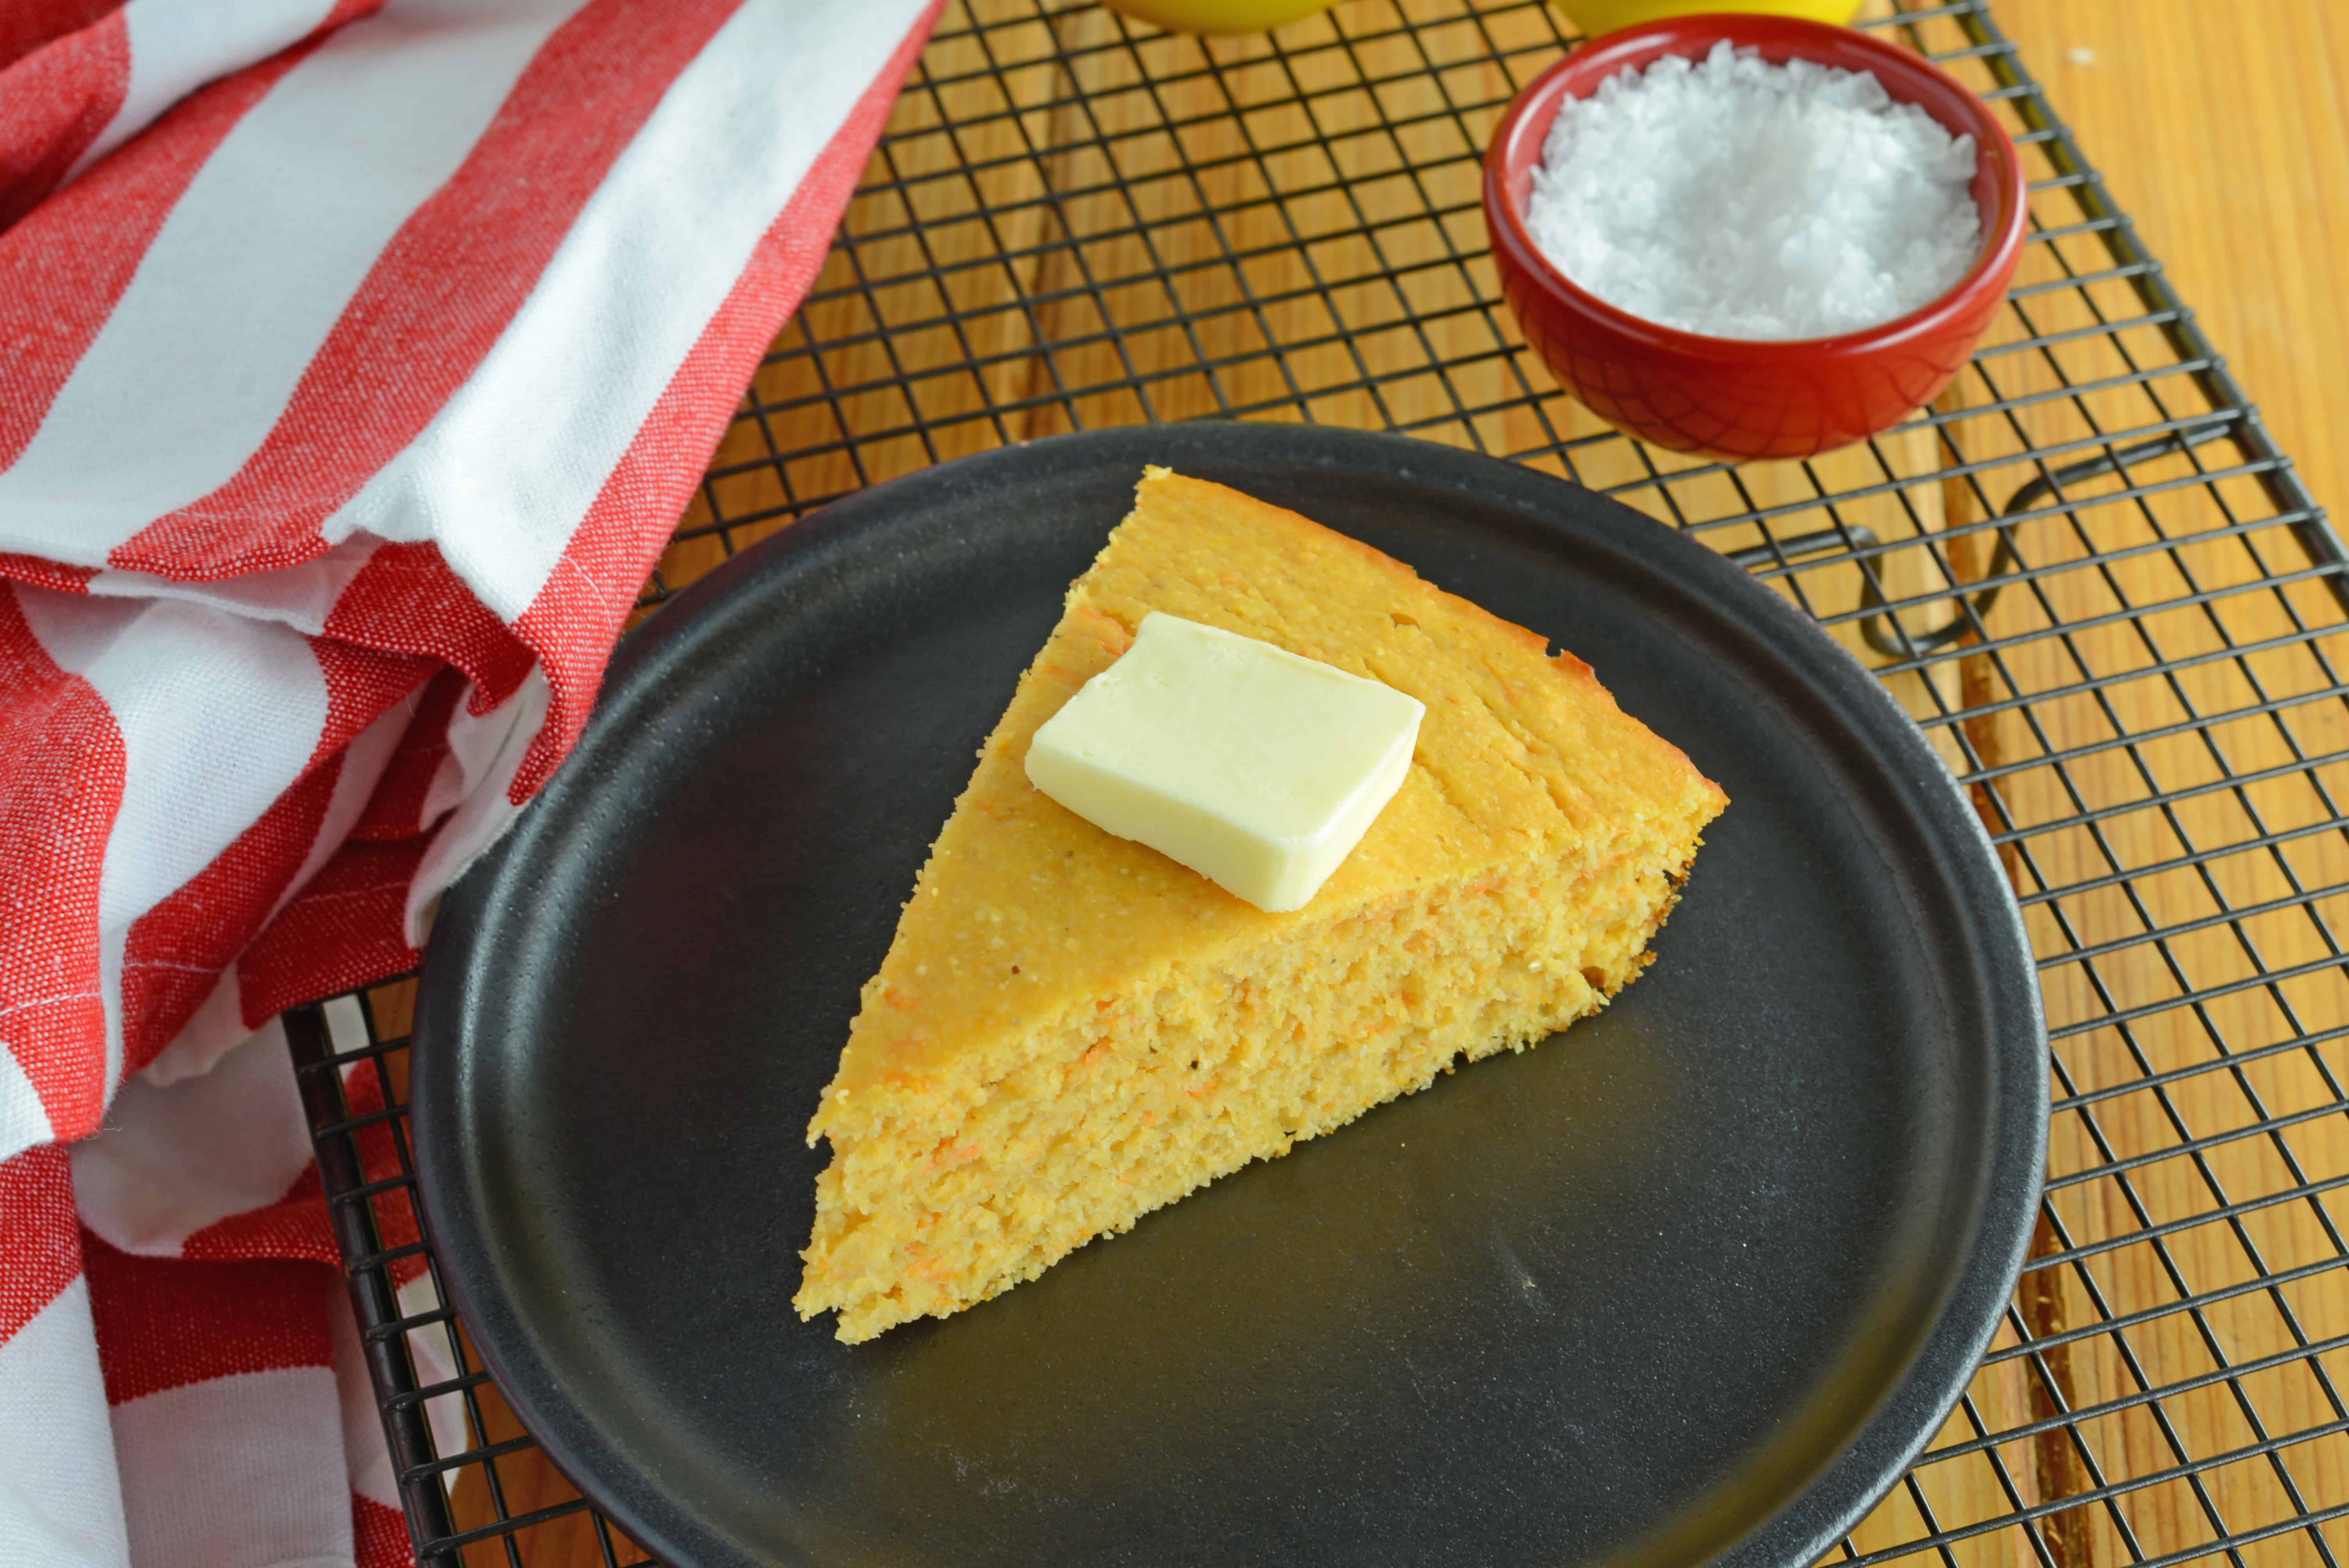 Sweet Potato Cornbread is a combination of two of my favorite fall foods: sweet potatoes and cornbread. Serve with your favorite chili or fried chicken!